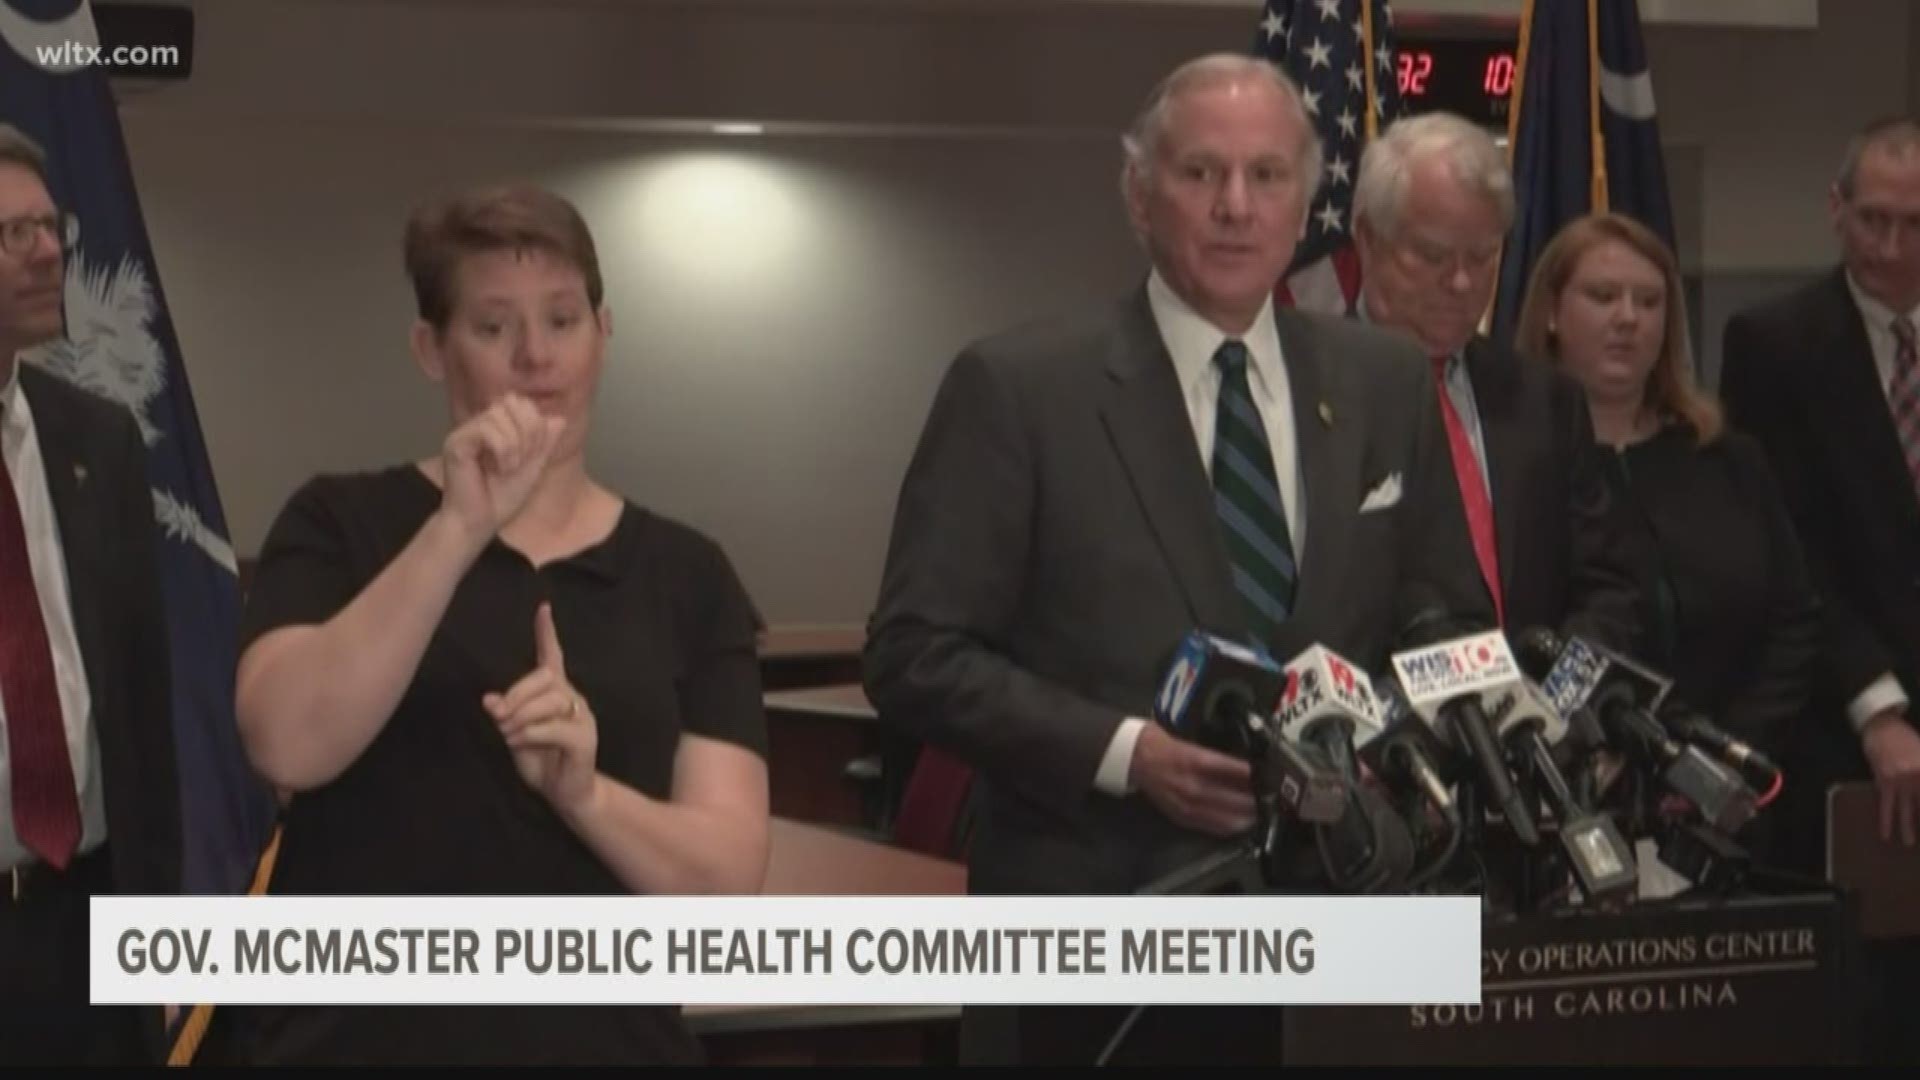 Gov. Henry McMaster said the best thing people can do is to use best hygiene practices, including covering coughs and washing hands frequently.